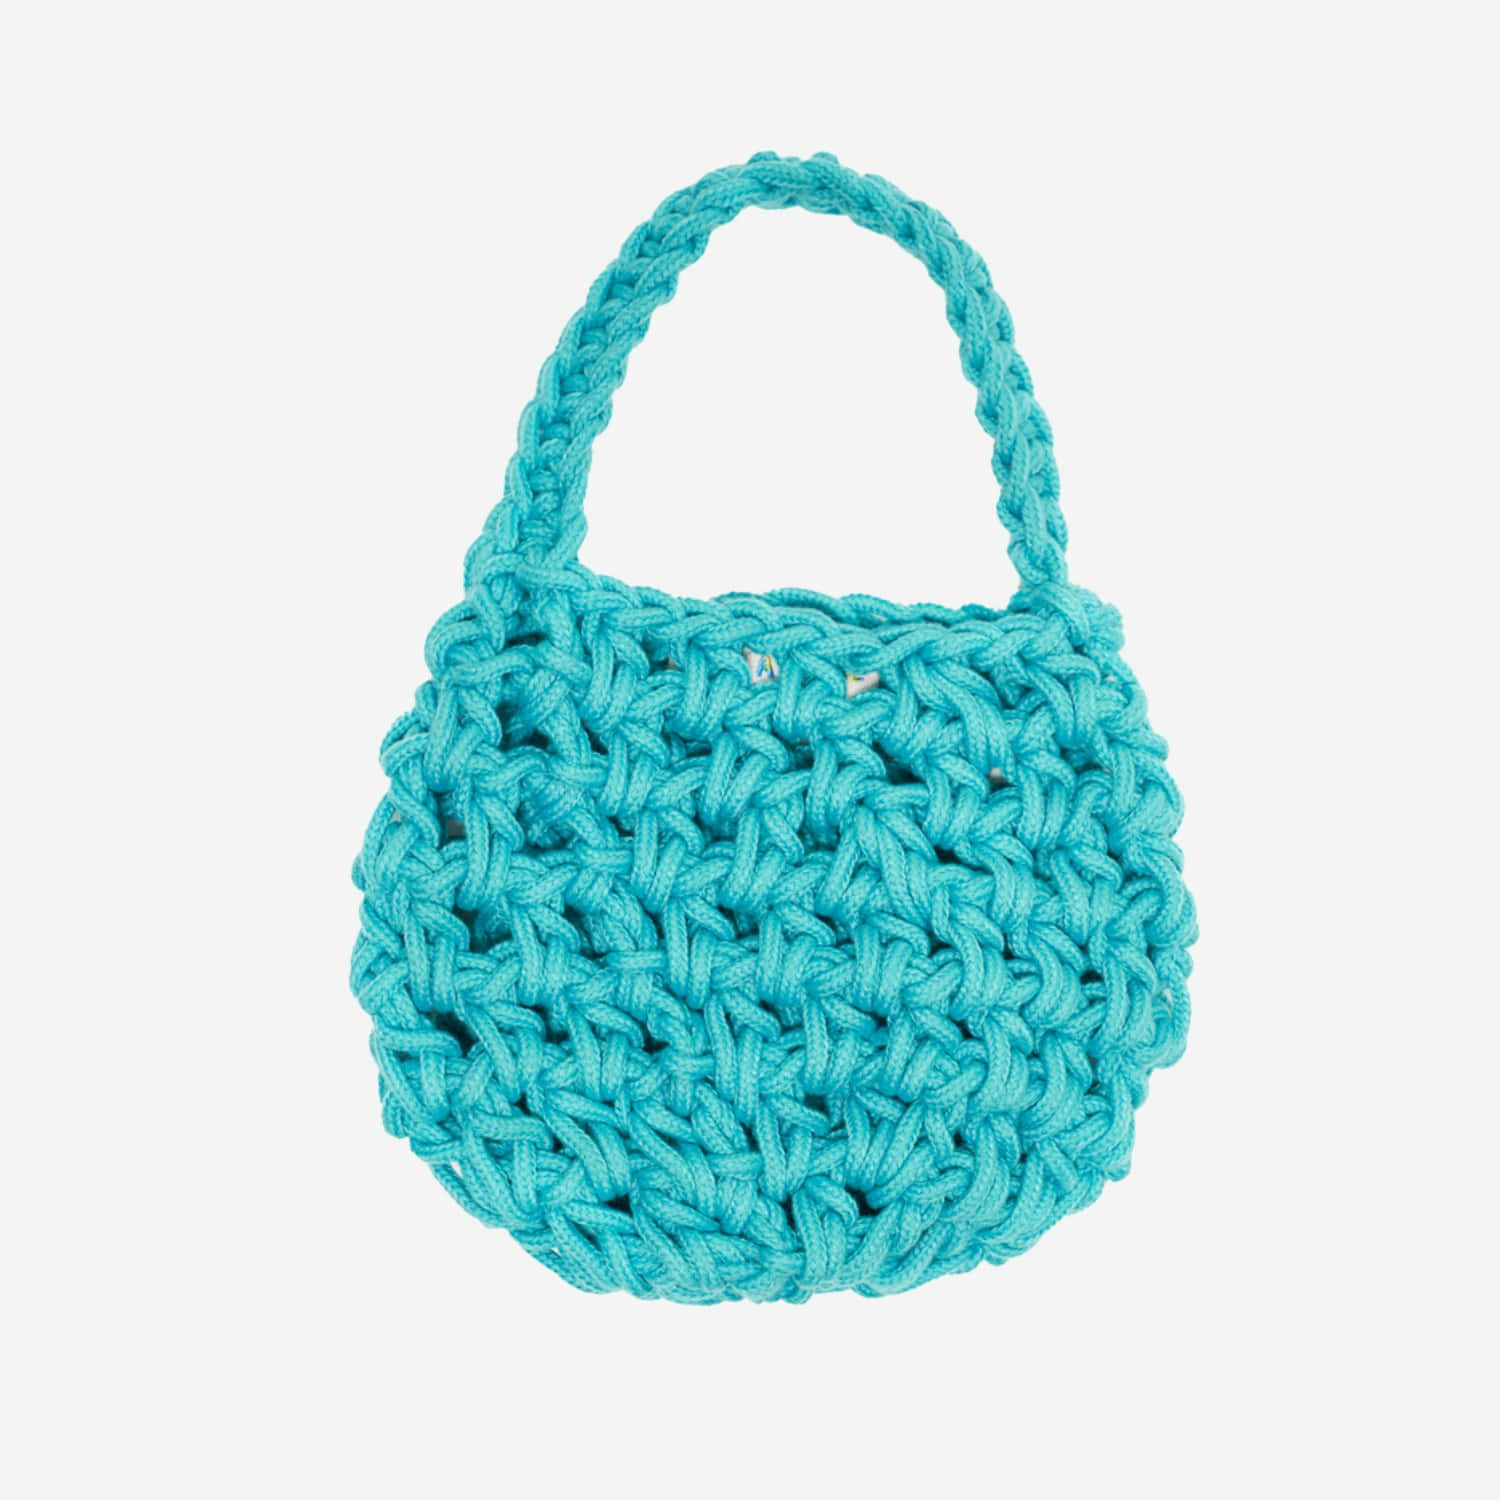 NET BAG ROUNDY TURQUOISE